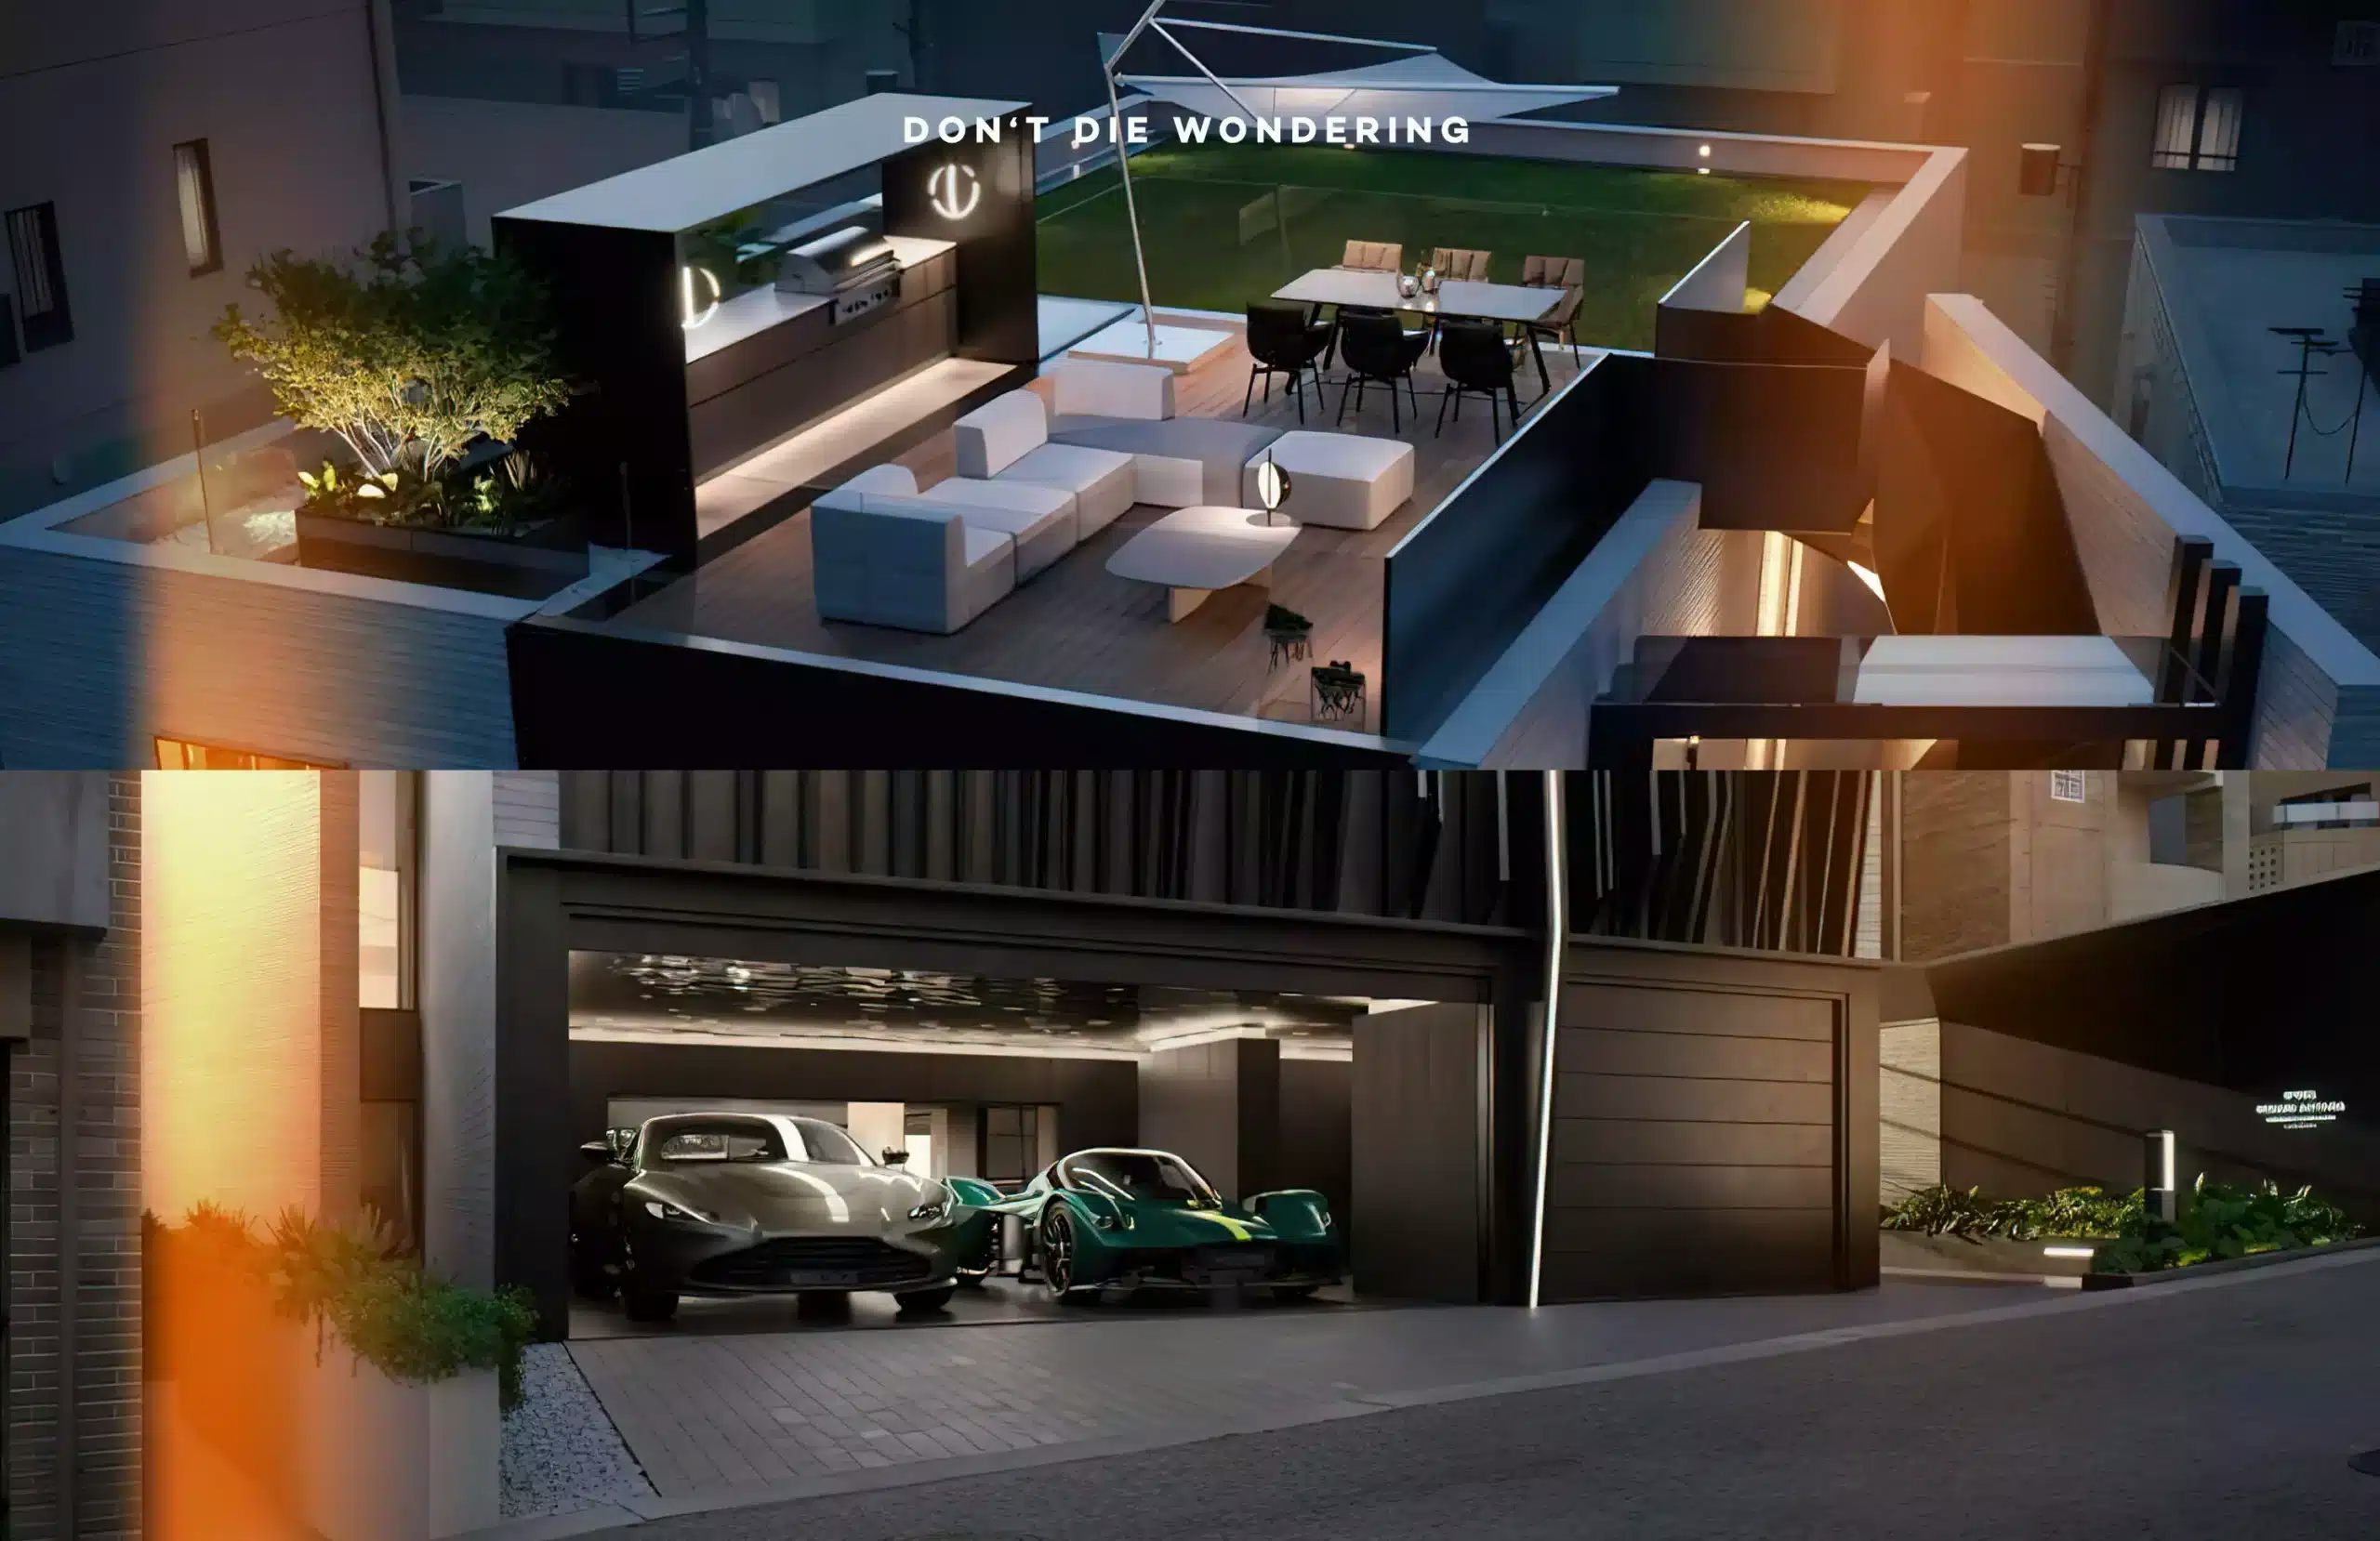 Aston Martin Drives into the Housing Market with Tokyo Residence